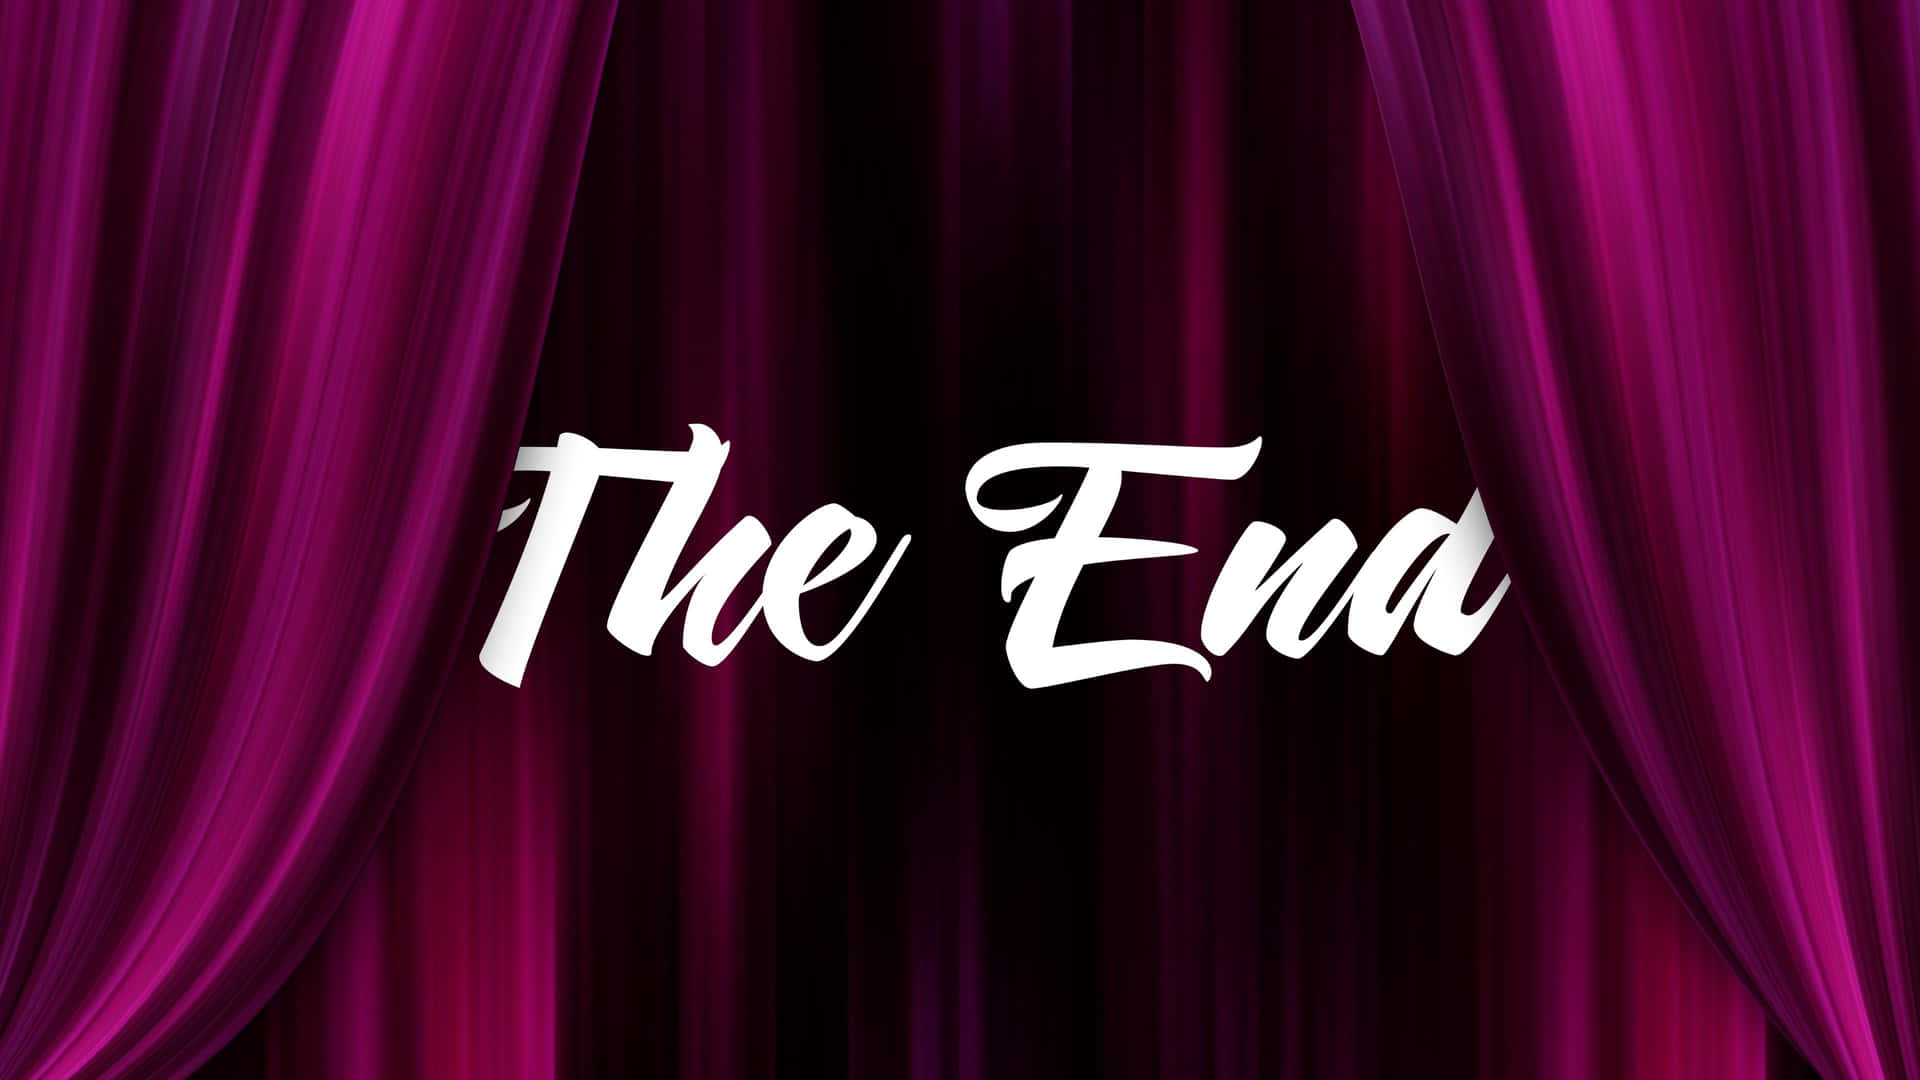 The end of the road Wallpaper